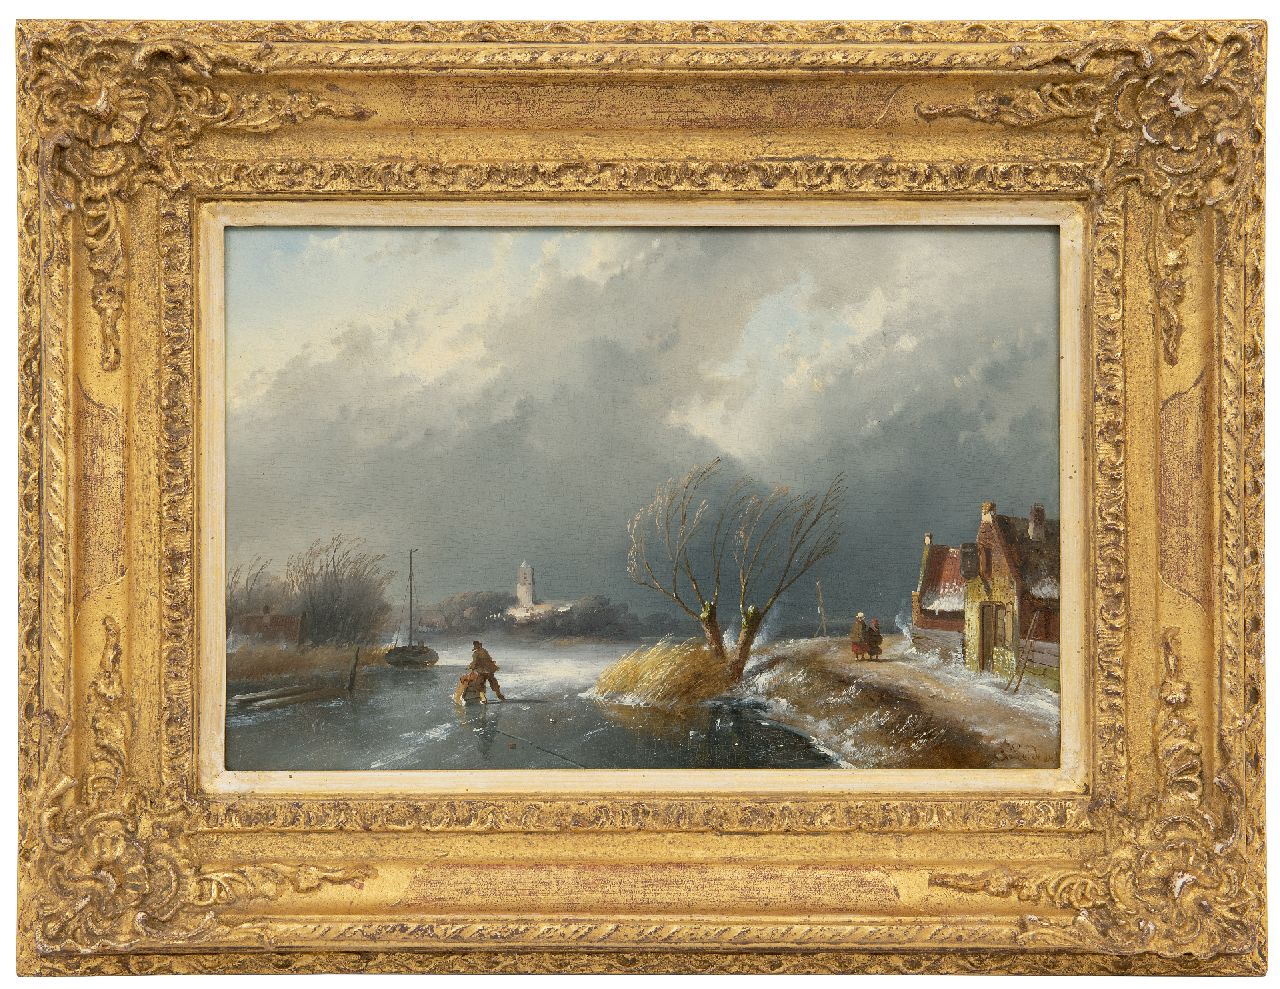 Leickert C.H.J.  | 'Charles' Henri Joseph Leickert | Paintings offered for sale | Winter landscape with upcoming snowstorm, oil on panel 23.0 x 34.9 cm, signed l.r.